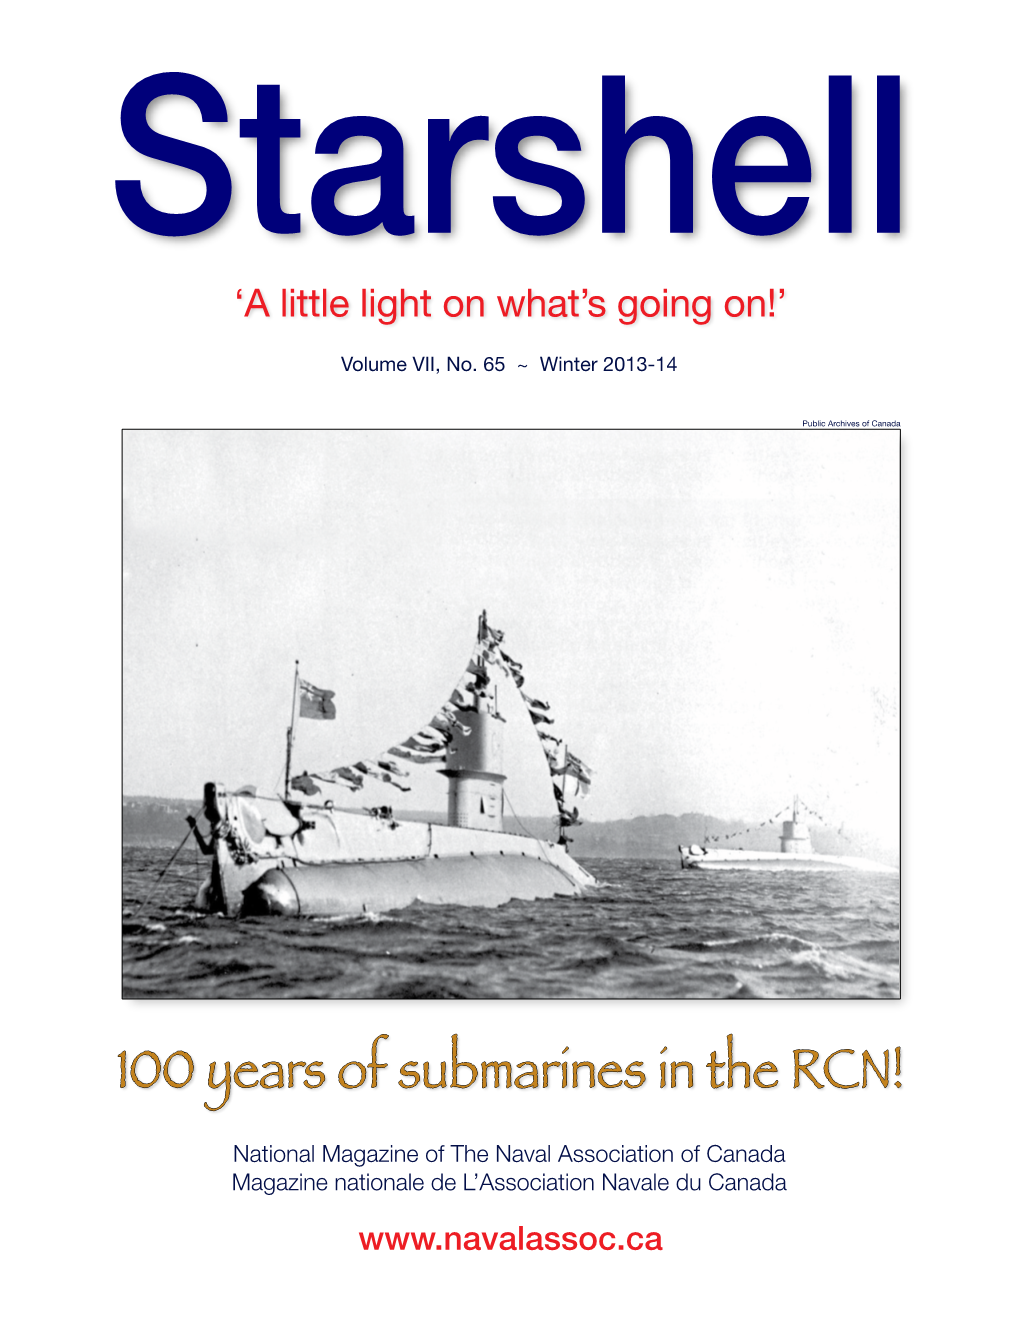 100 Years of Submarines in the RCN!